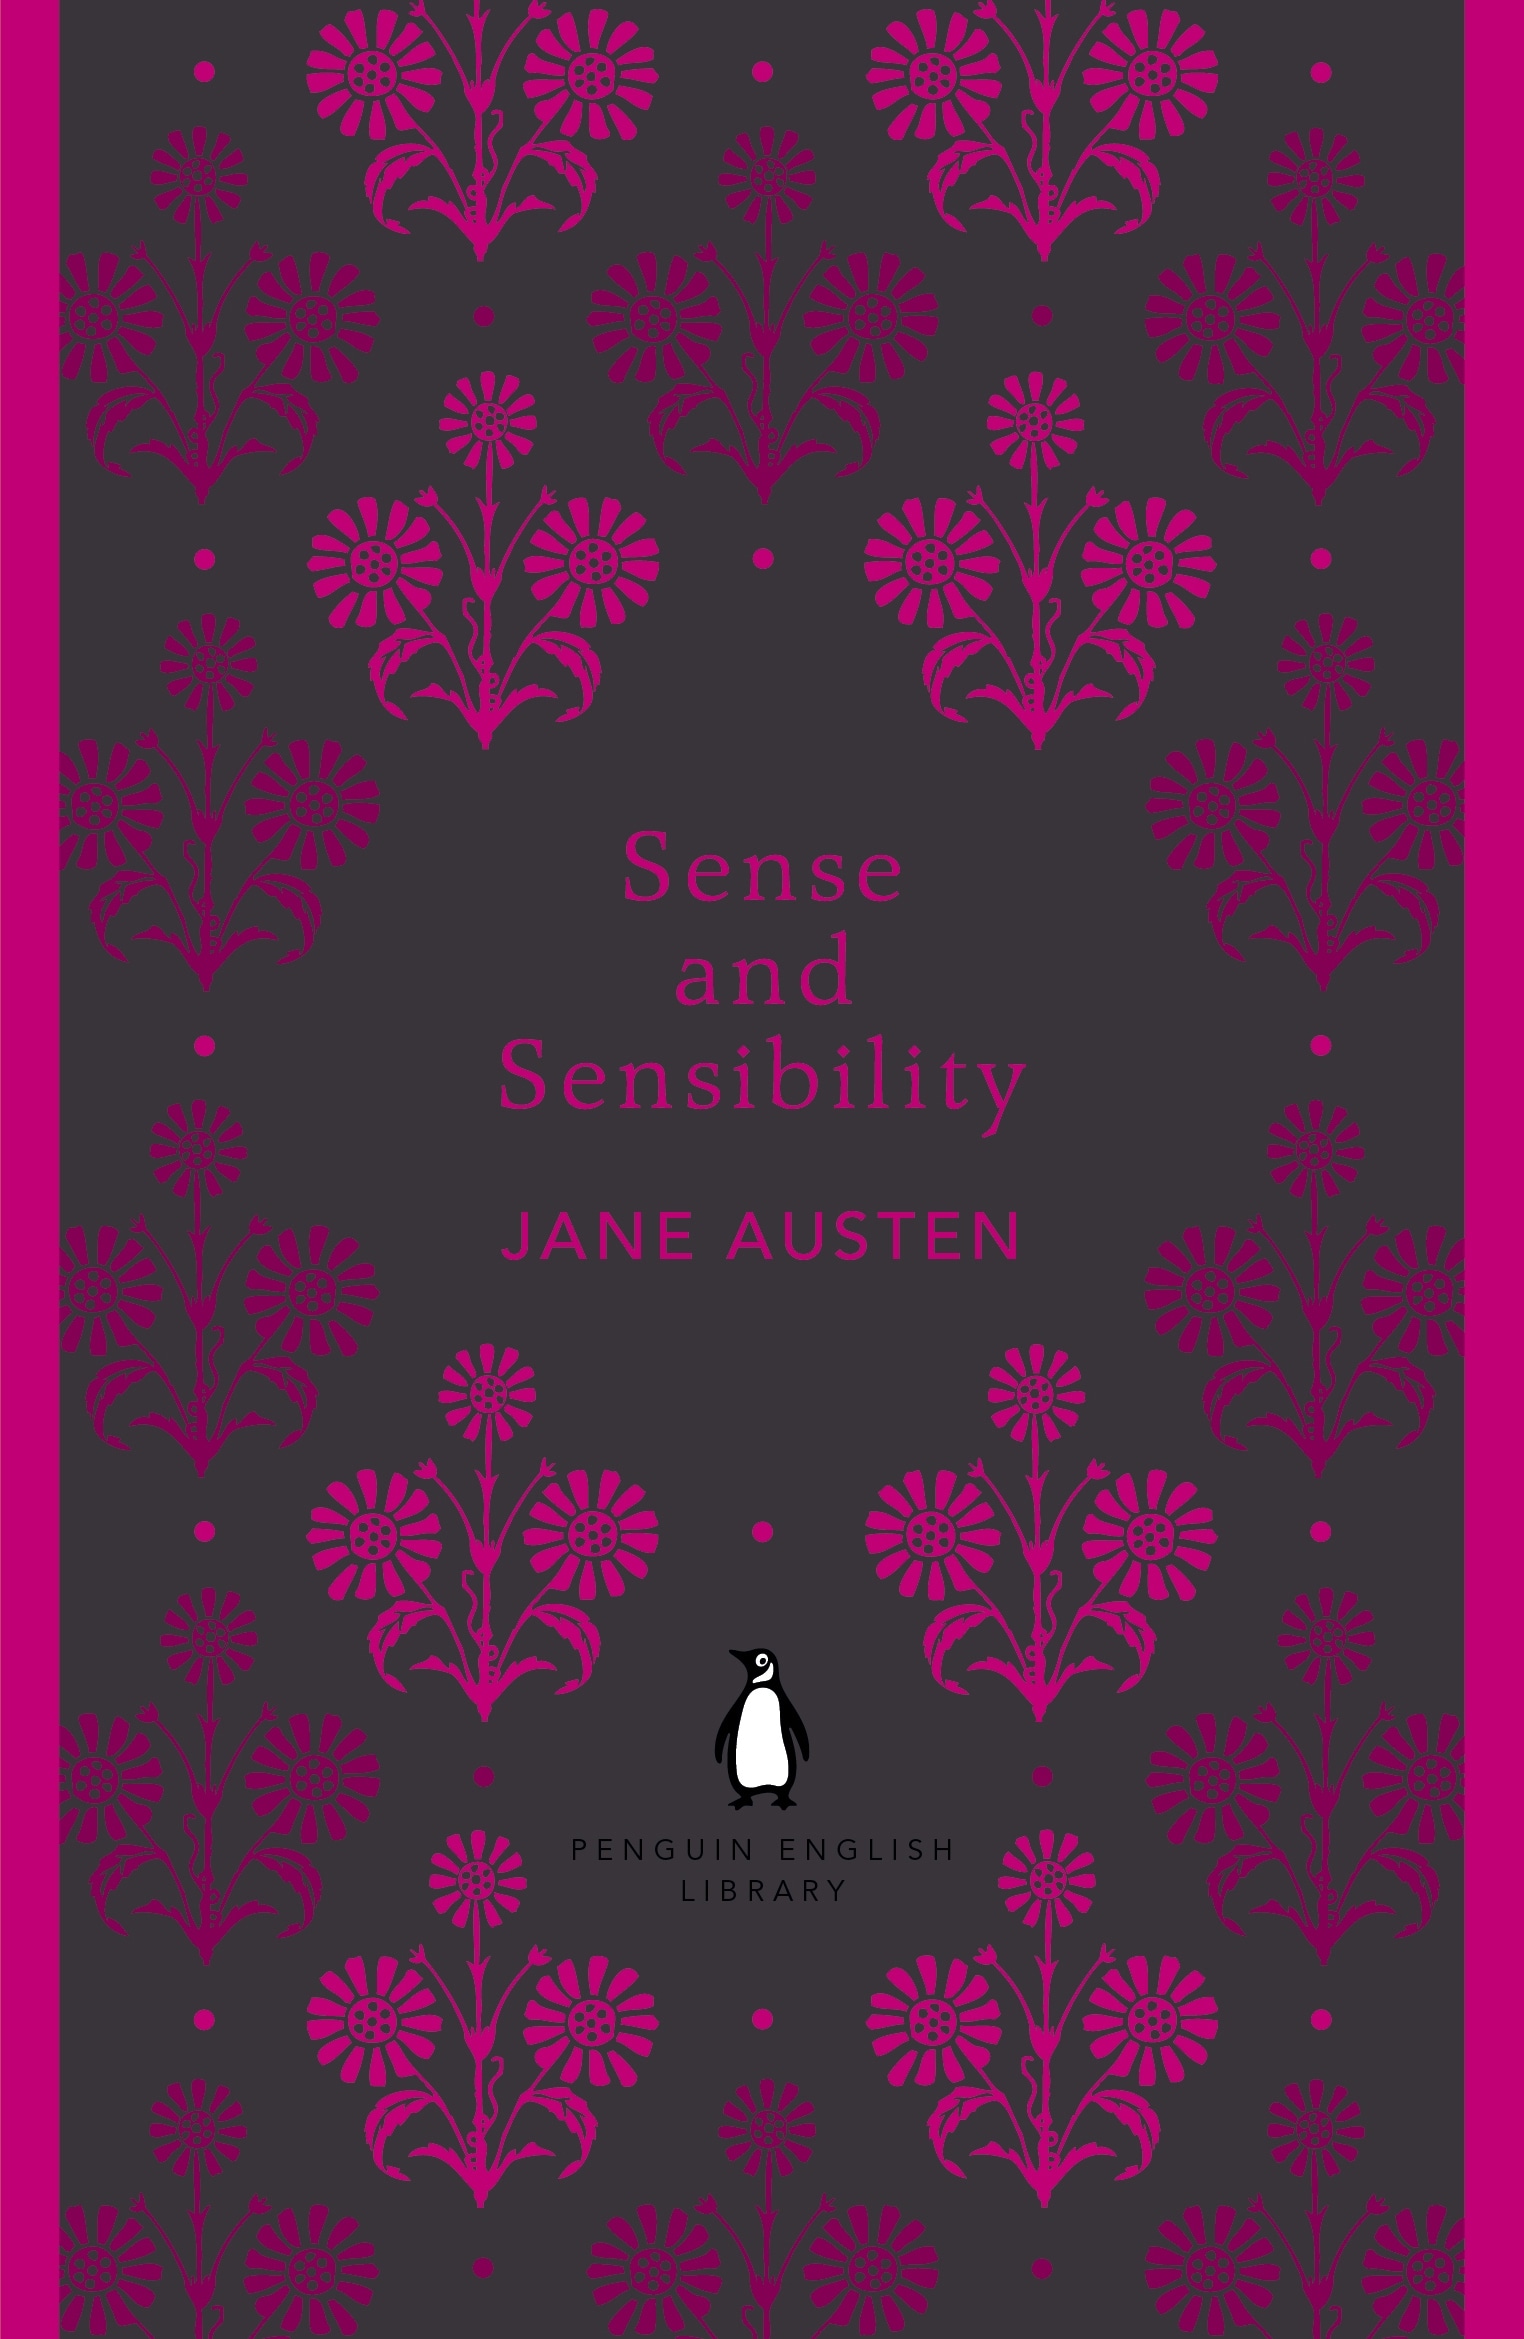 Book “Sense and Sensibility” by Jane Austen — August 30, 2012